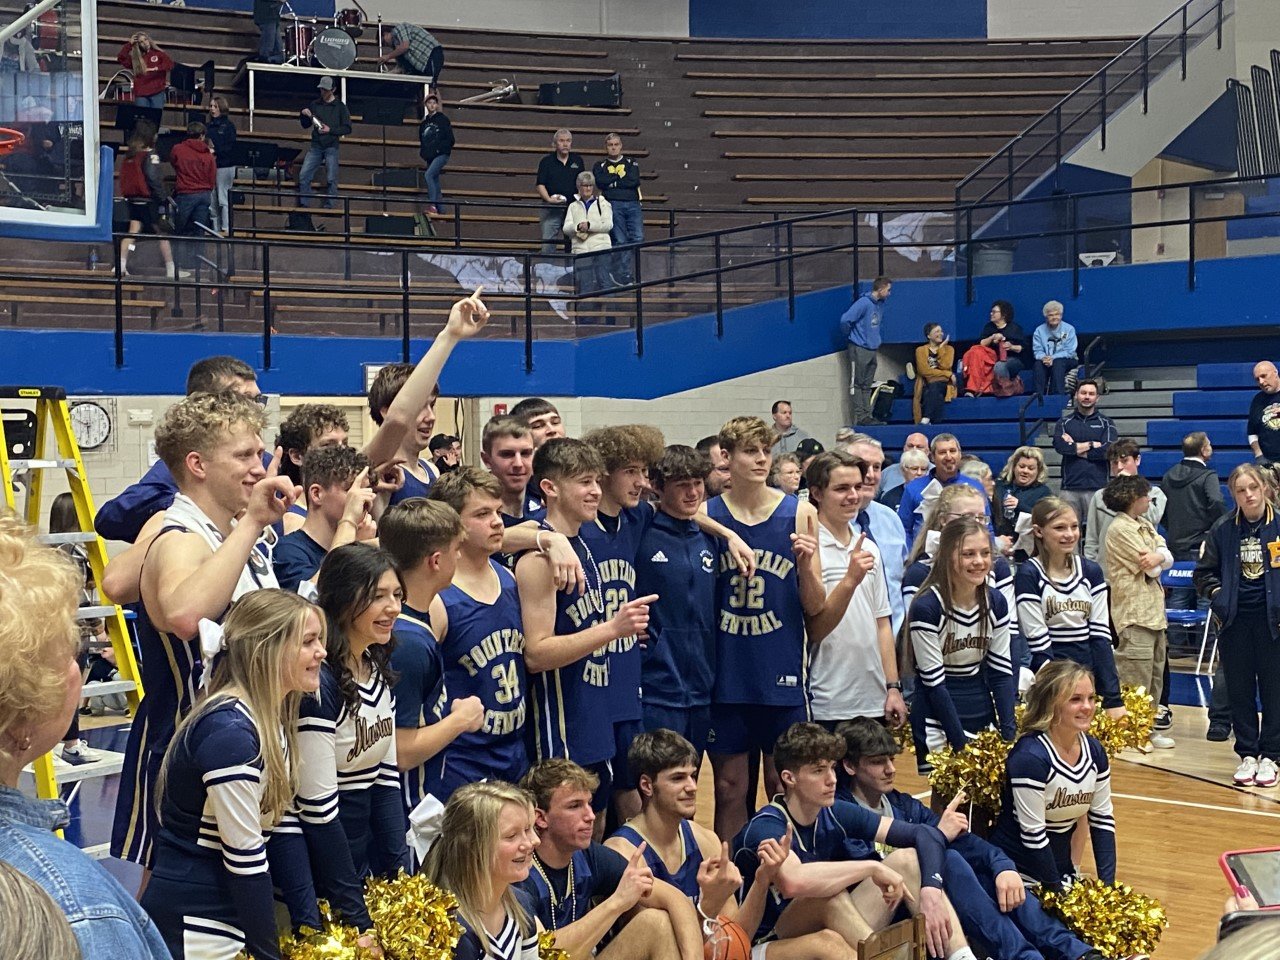 Amongst a sea of Fountain Central fans, the No. 2 ranked Mustangs celebrated their Regional Championship win over LIberty Christian. FC has tied the most wins in program history as they are now 23-4 on the season and will play for a spot in the state championship next Saturday.